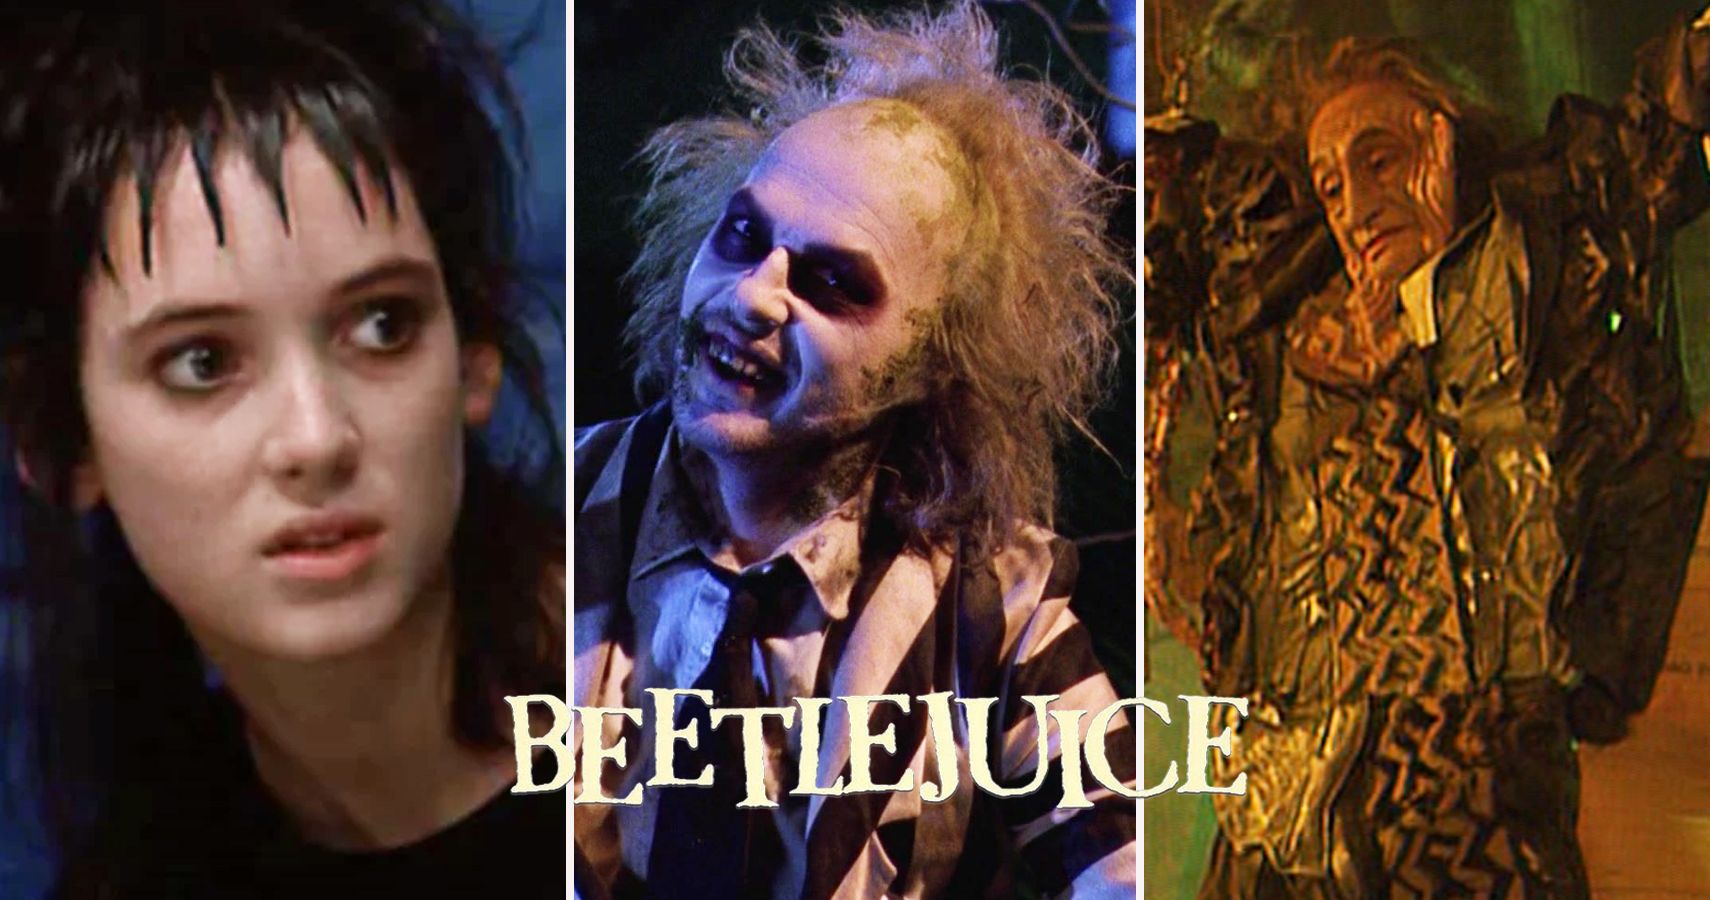 25 Little Known Behind The Scenes Facts About Beetlejuice